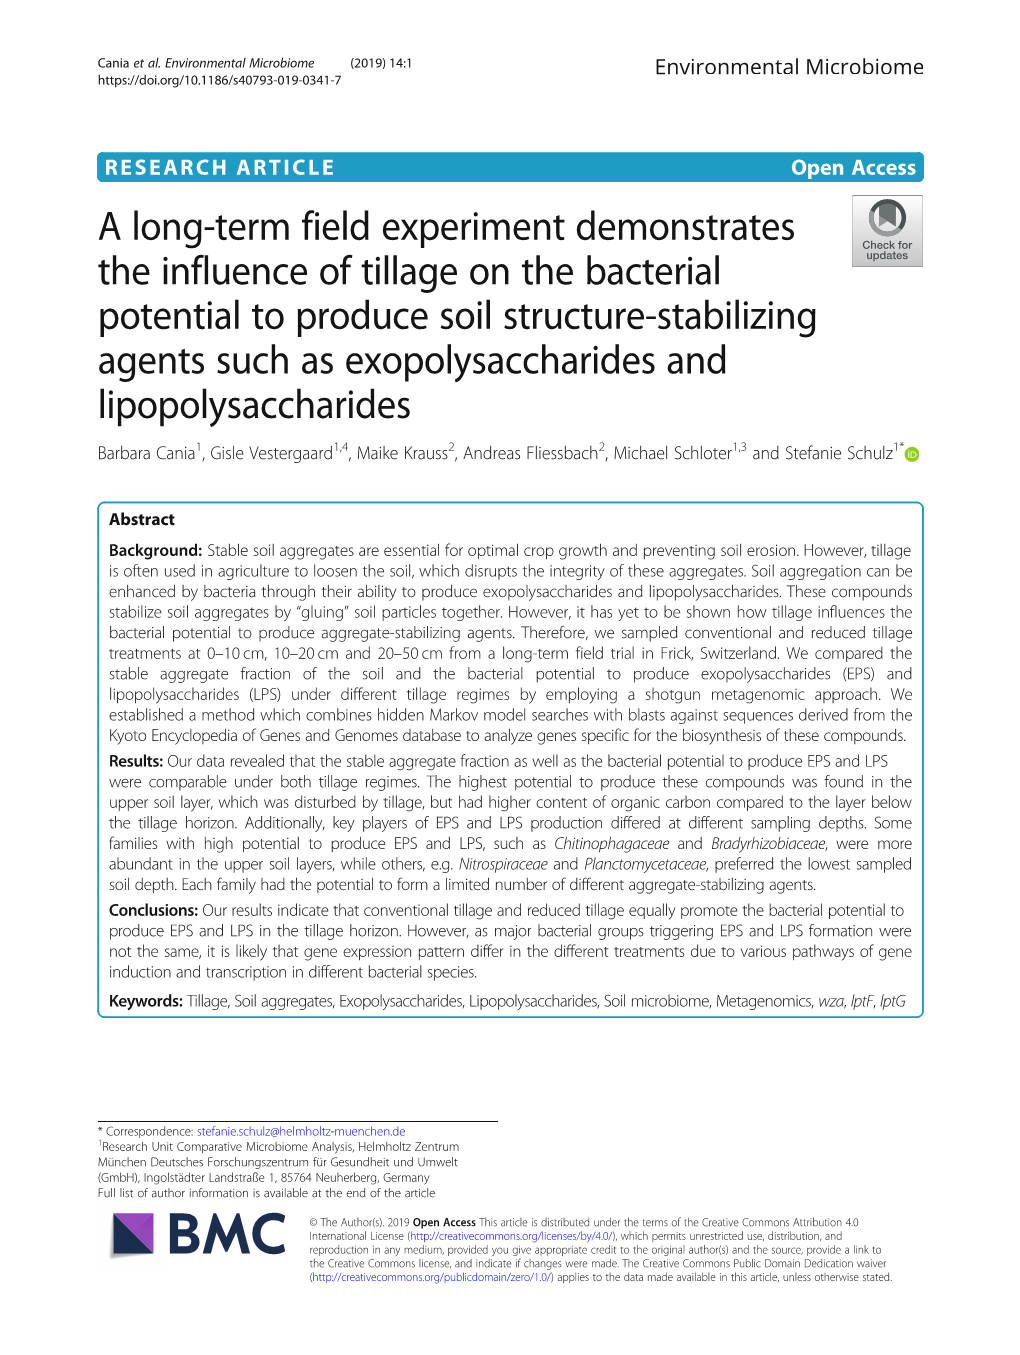 A Long-Term Field Experiment Demonstrates the Influence Of